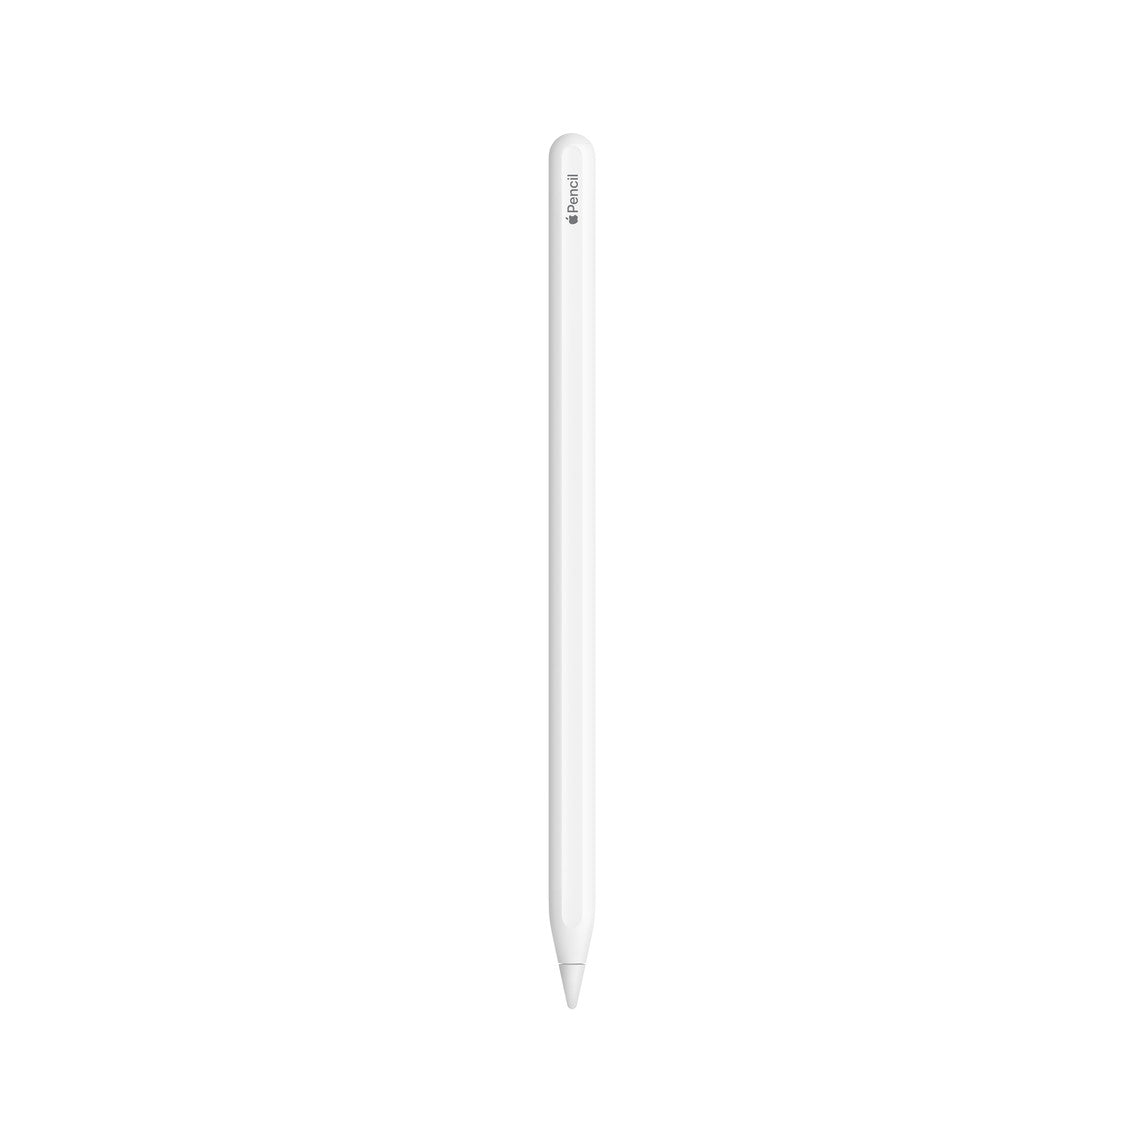 Apple Pencil 2nd Gen (A2051) For iPad Pro